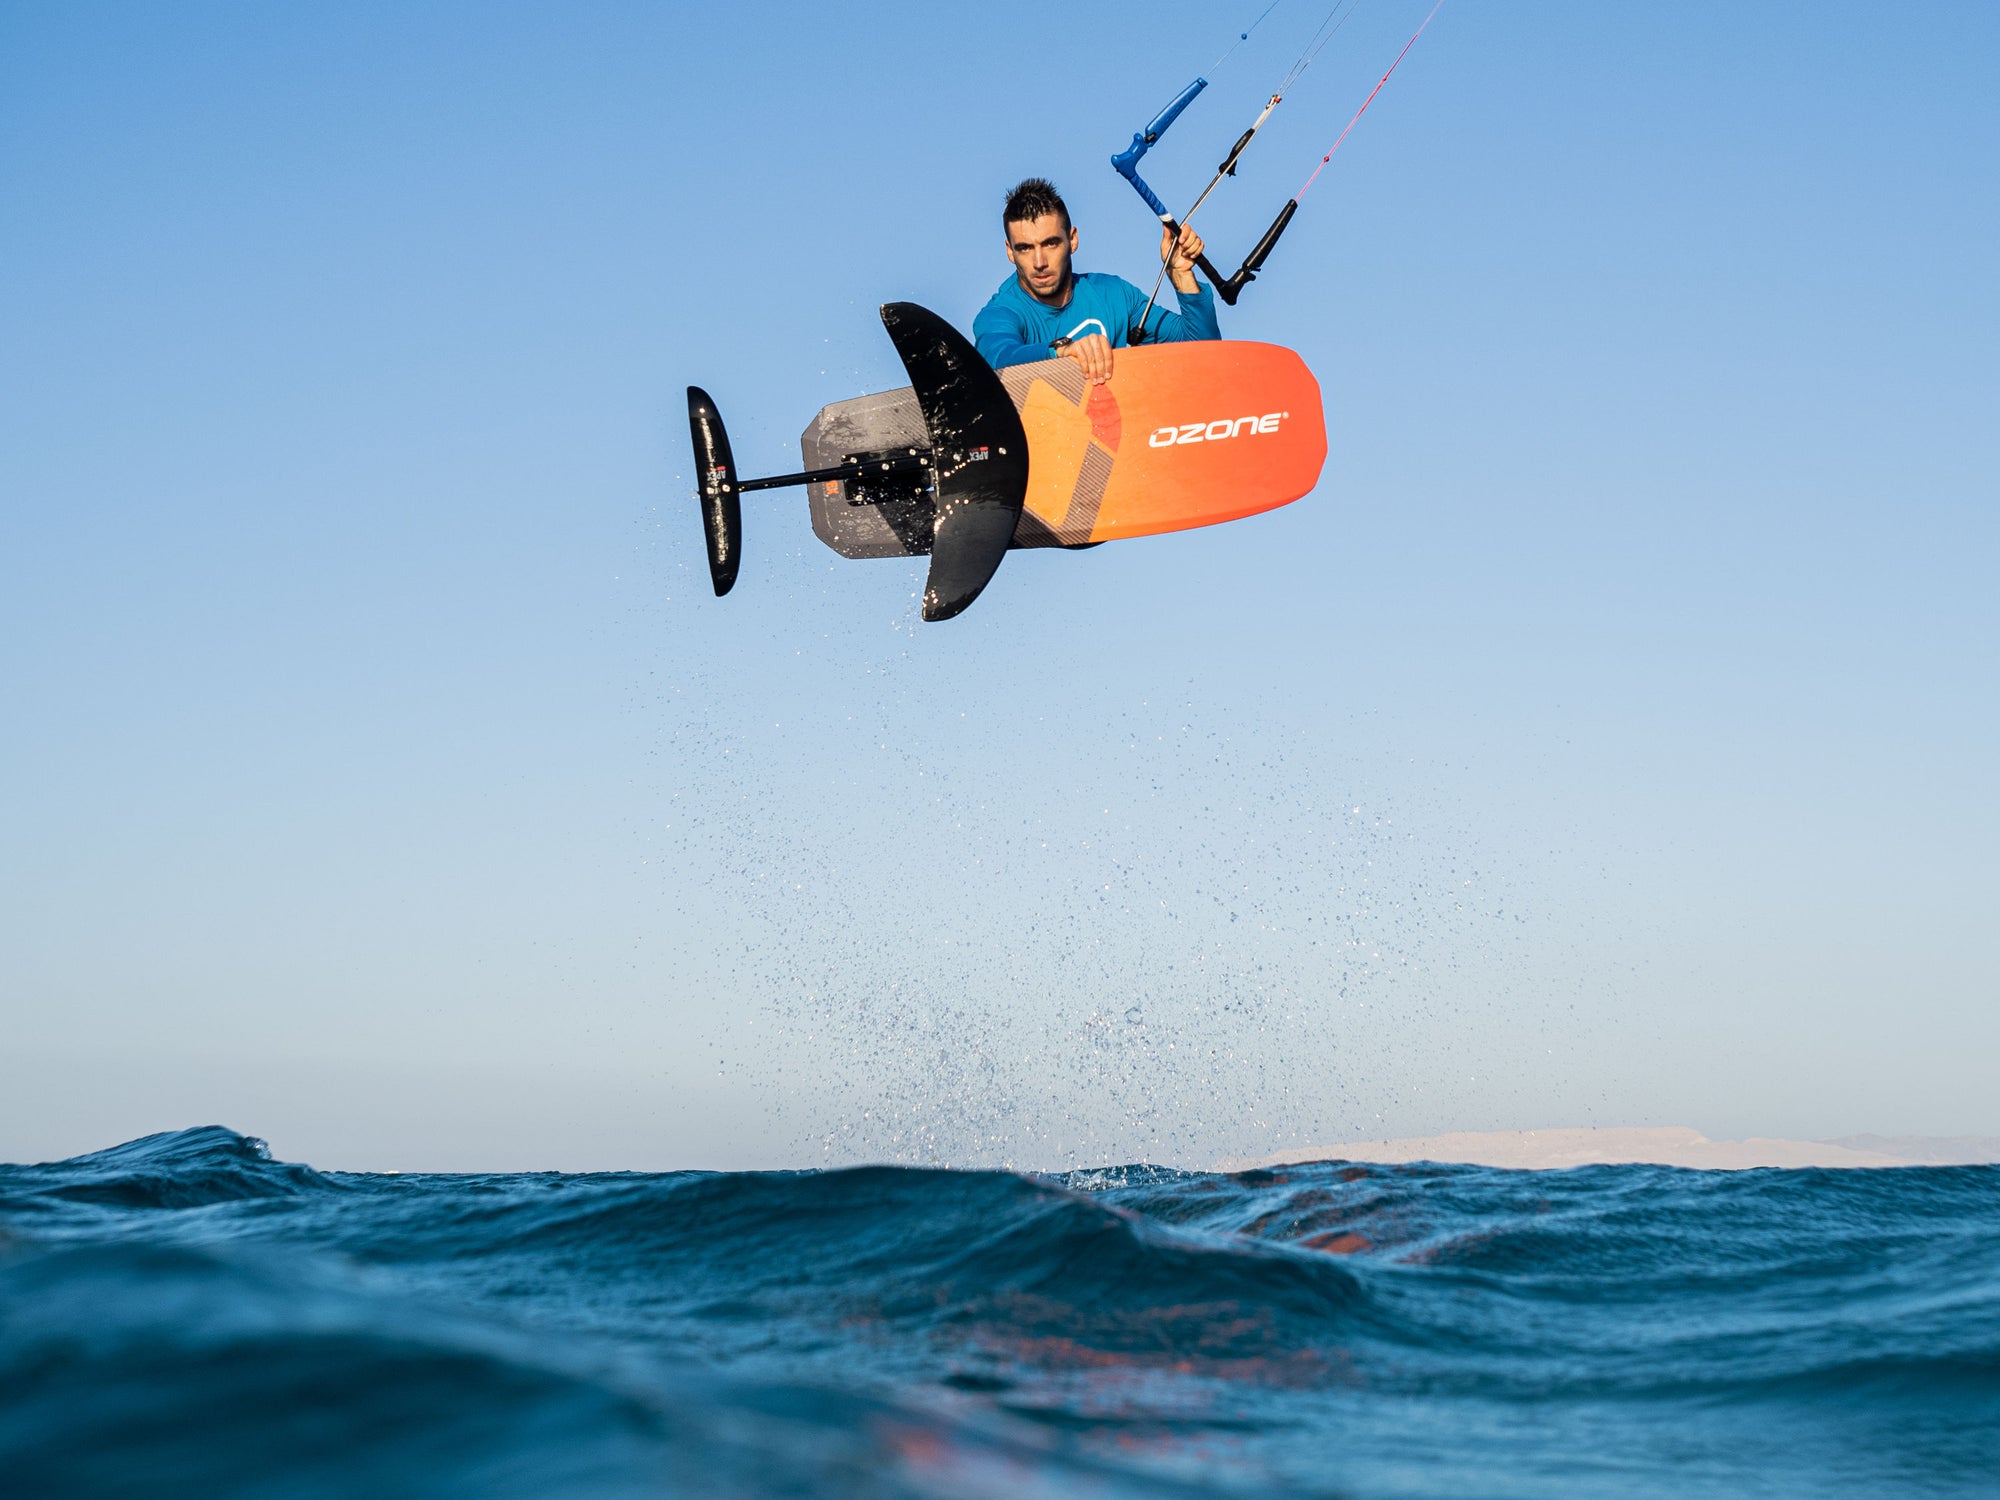 Ozone kitesurfer jumping through the air with the Ozone Apex V1 foil and board.